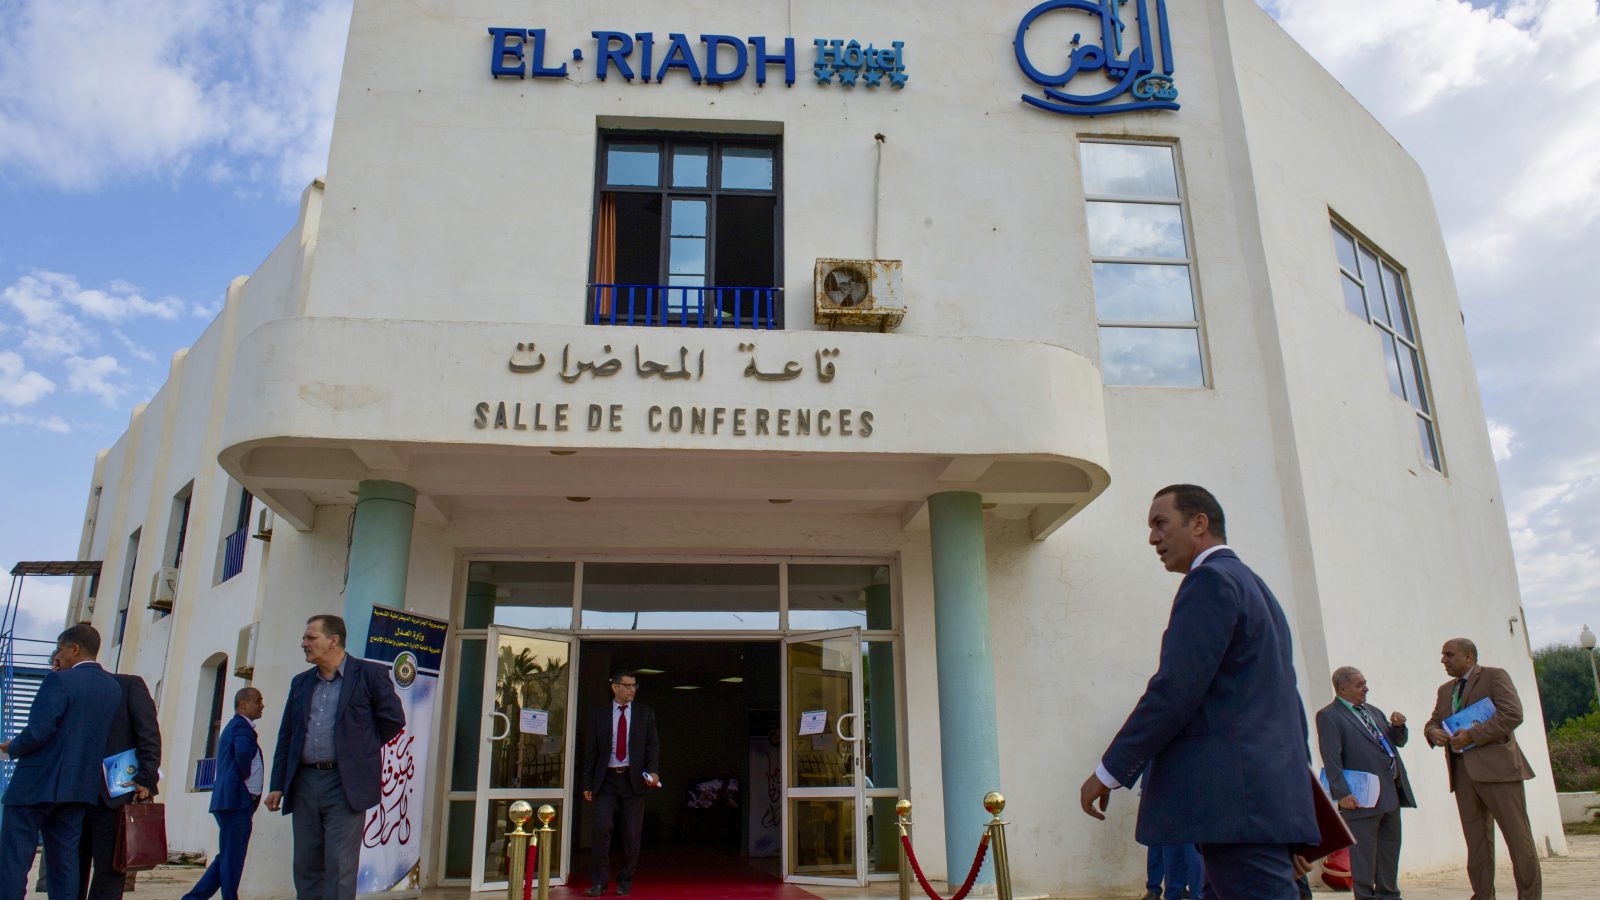 8 October 2018 conference in Algiers